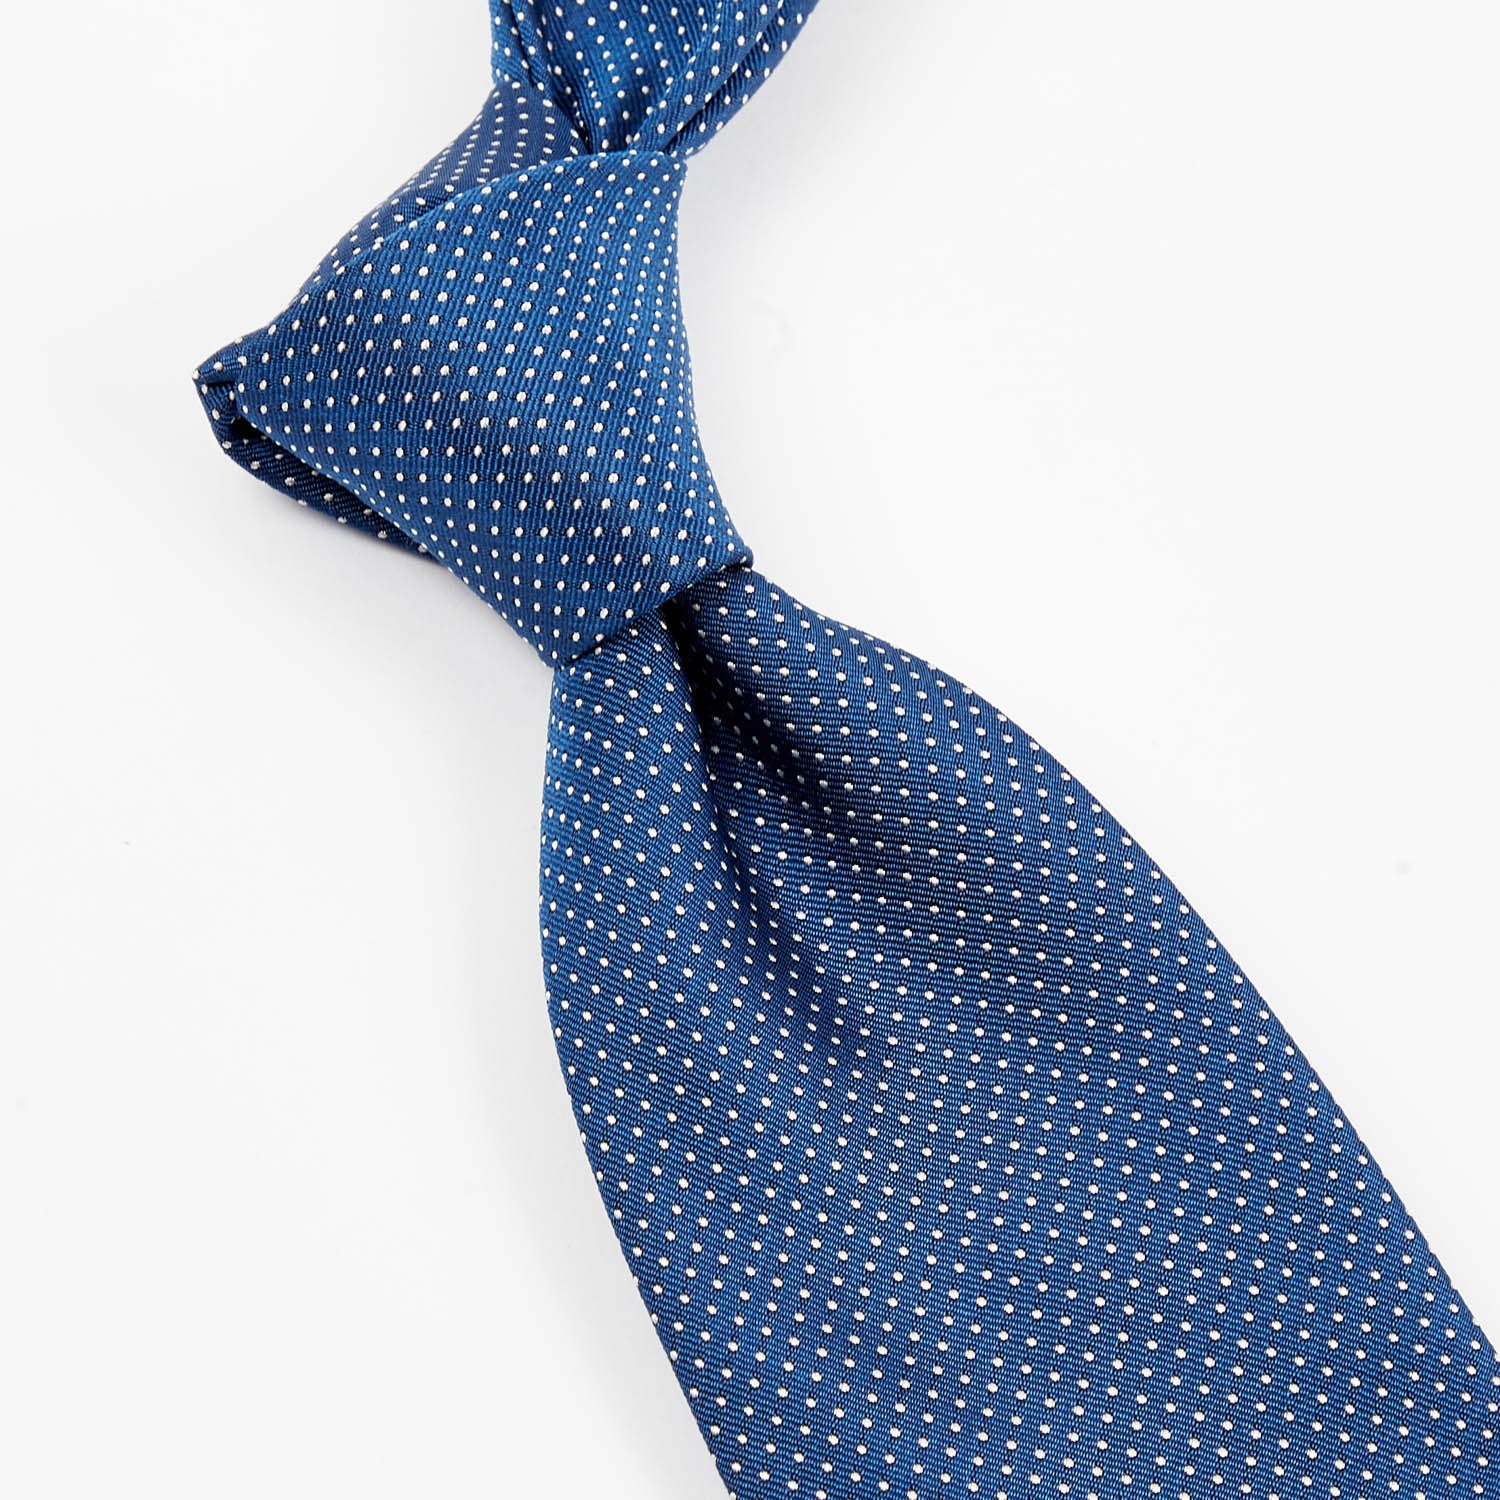 A Sovereign Grade Blue Silk Micro Dot Tie from KirbyAllison.com on a white surface.